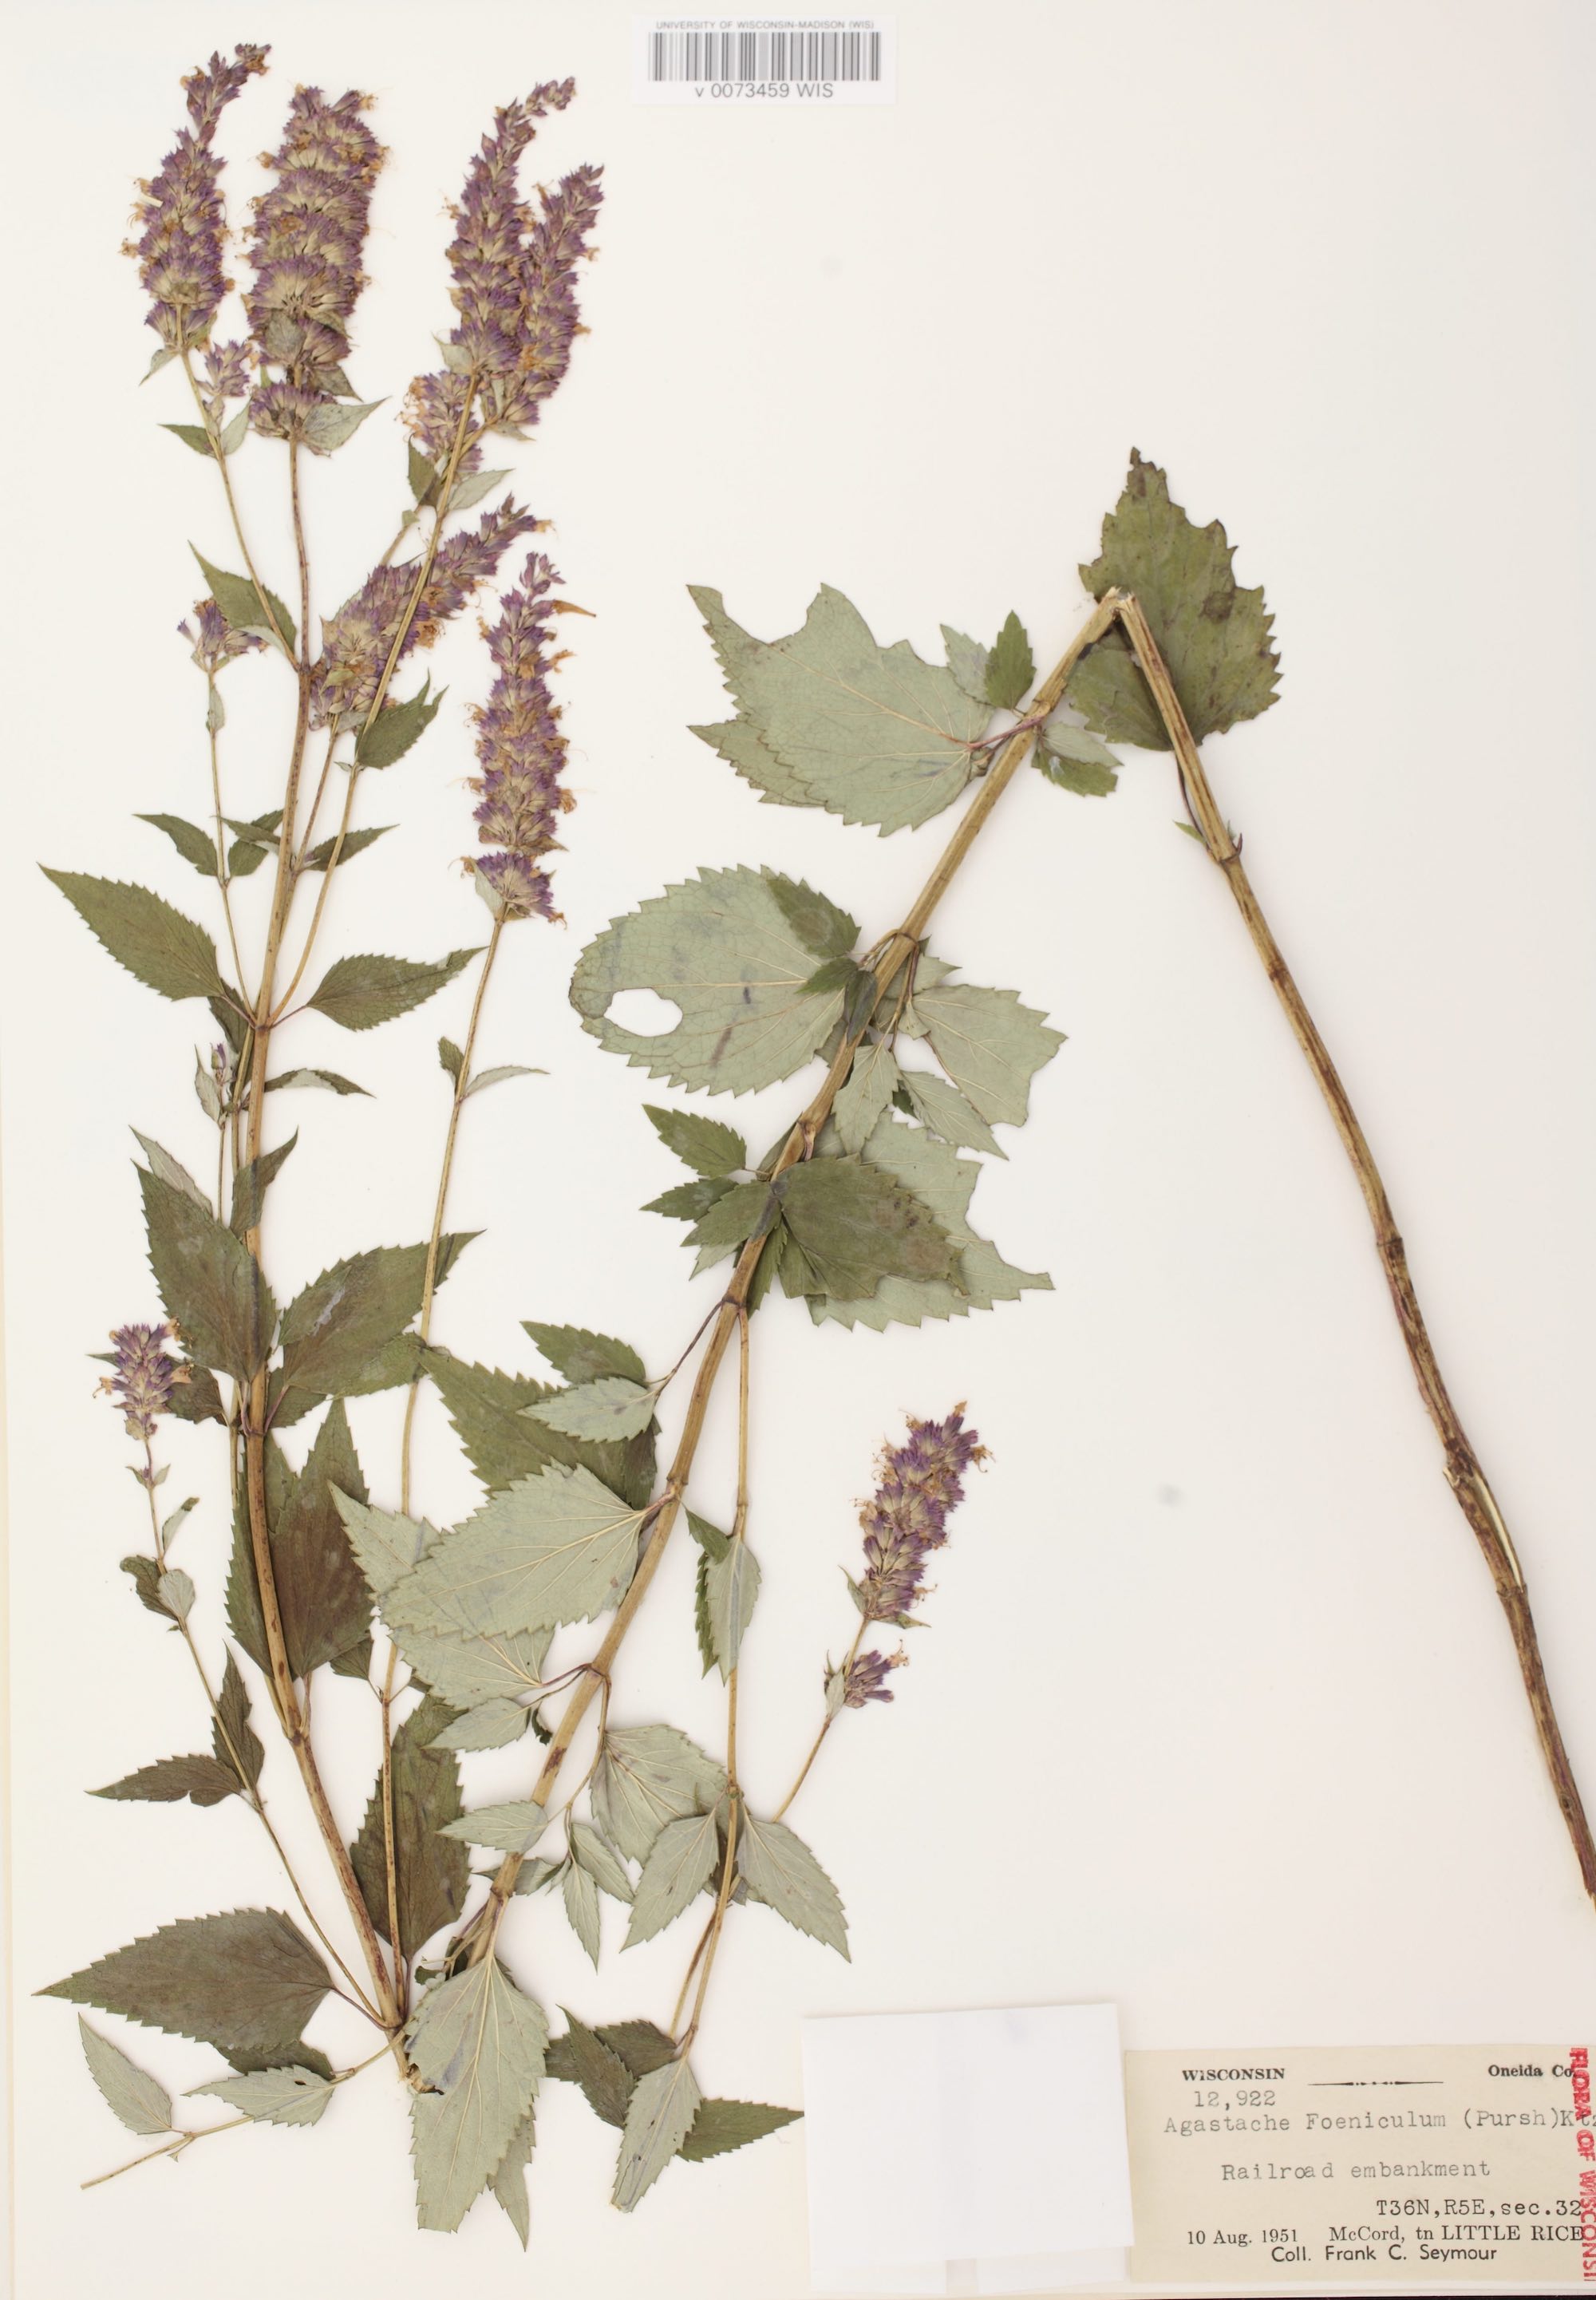 Anise Hyssop specimen collected in Oneida County on a railroad embankment on August 10, 1951.